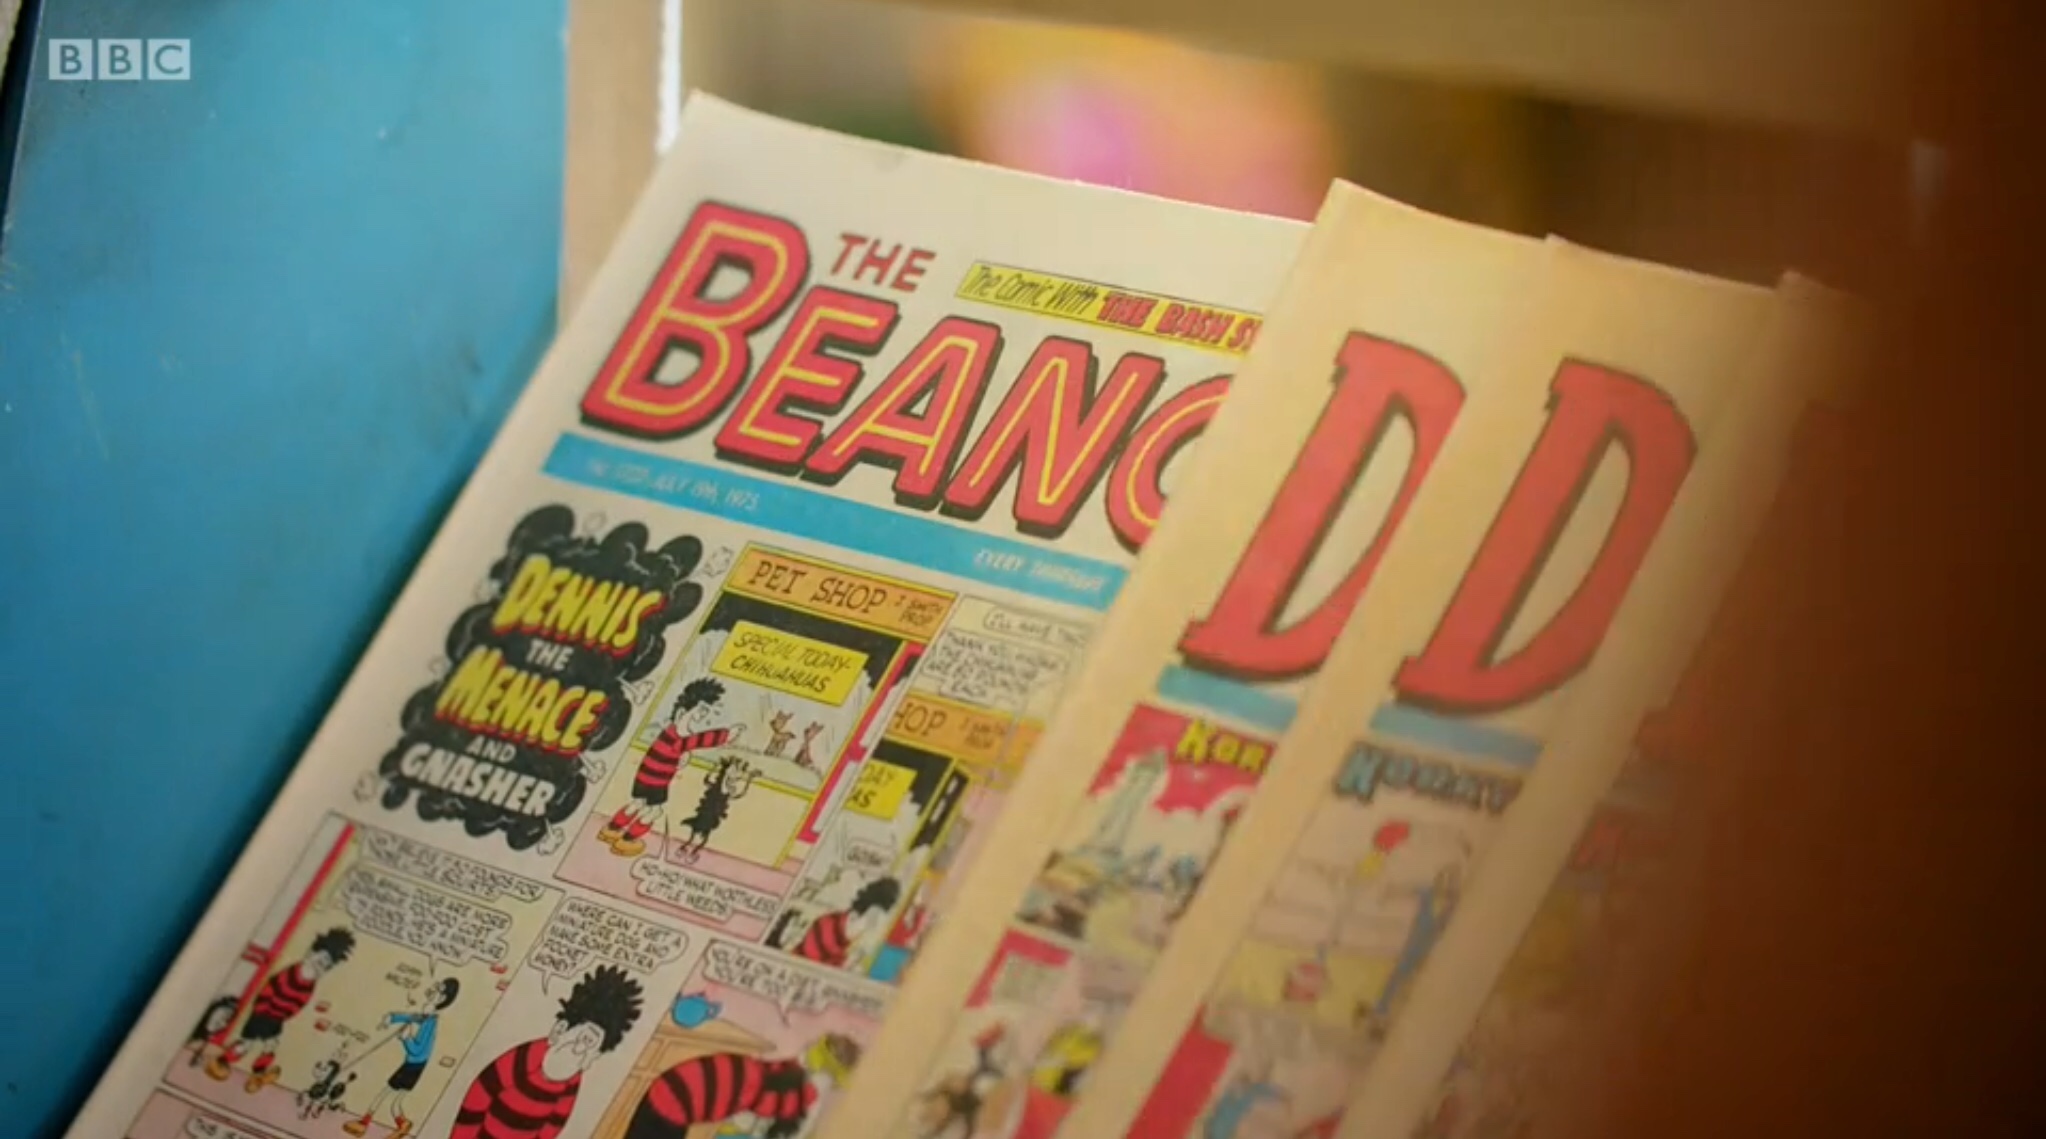 Back in Time for the Corner Shop - Comics. Image: BBC